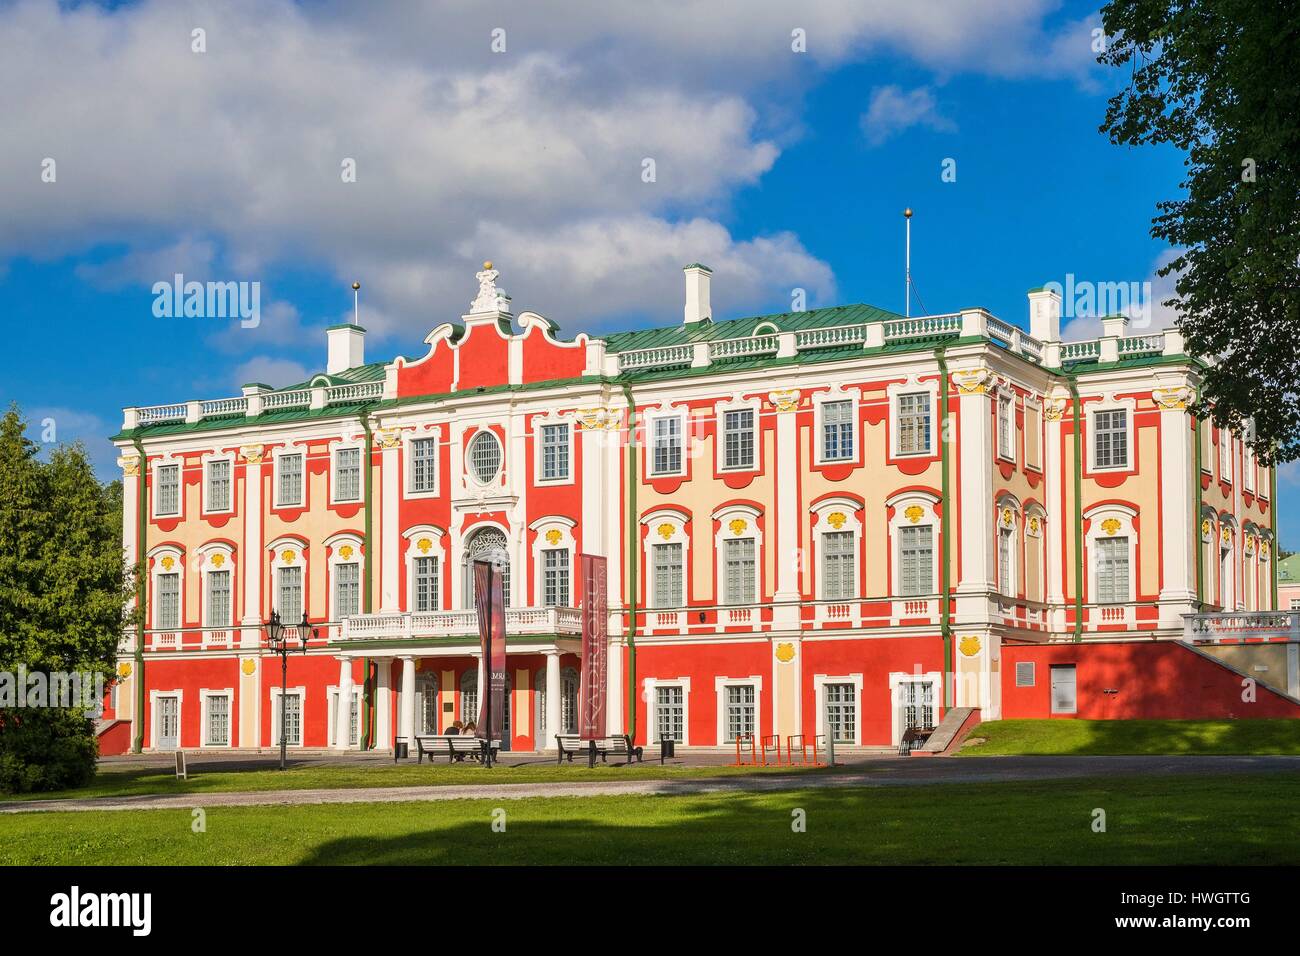 Estonia (Baltic States), Harju region, Tallinn, historical center listed as World Heritage by UNESCO, Kadriorg Palace, located in Kadriorg Park, built in 1718 by the Italian architect Niccolò Michetti for Tsar Peter the Great and His wife Catherine 1st, Weizenbergi 37 Stock Photo